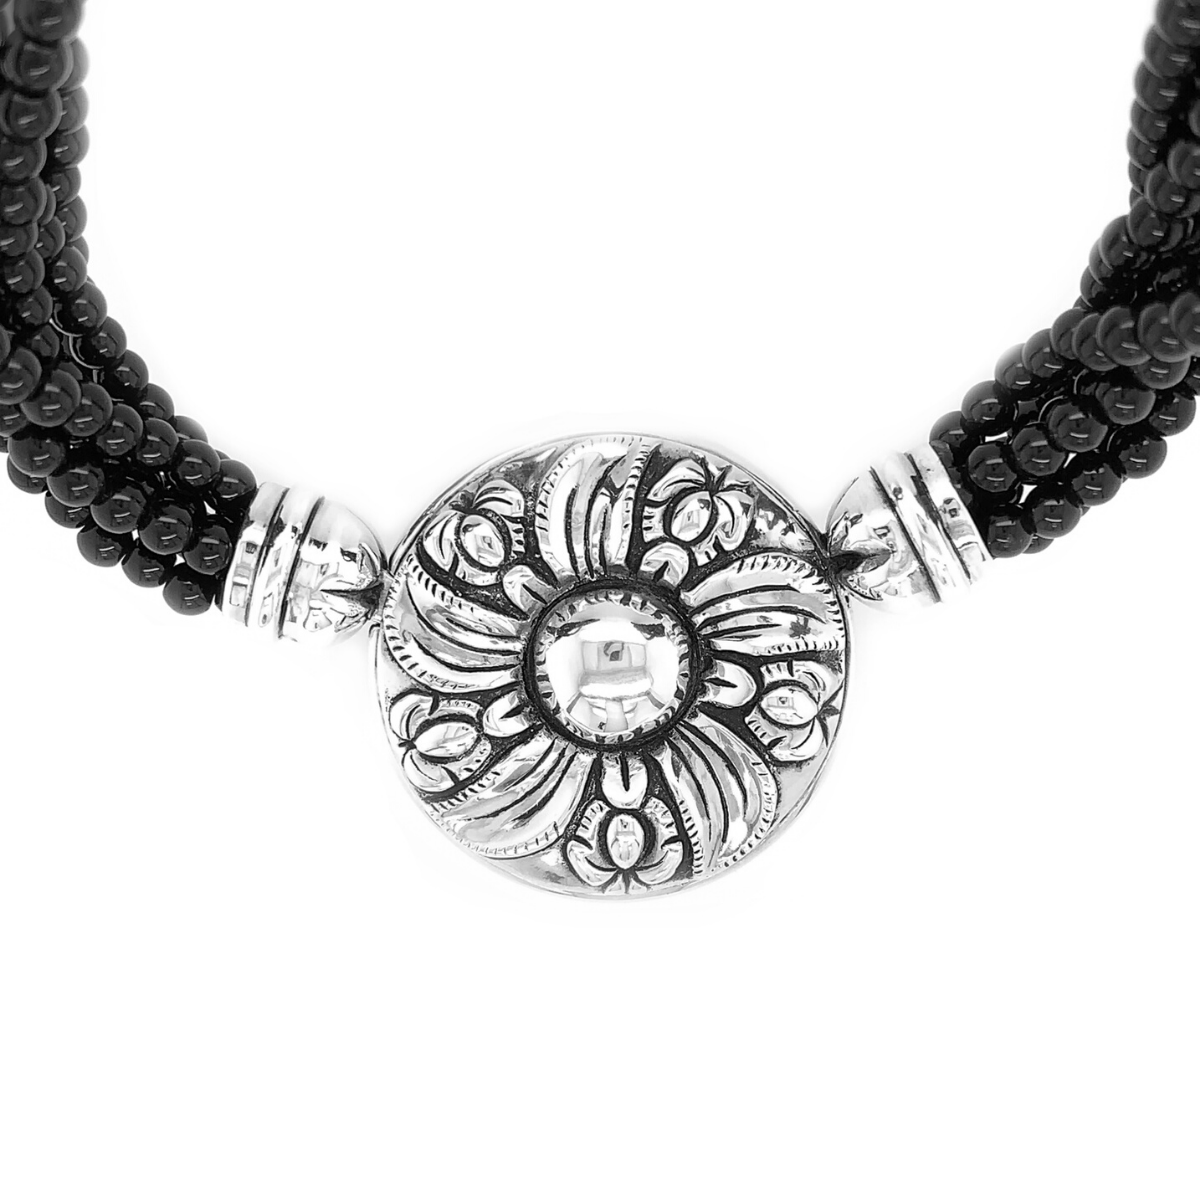 Black Onyx Strands & Sterling Silver Colonial Flower Necklace - Qinti - The Peruvian Shop